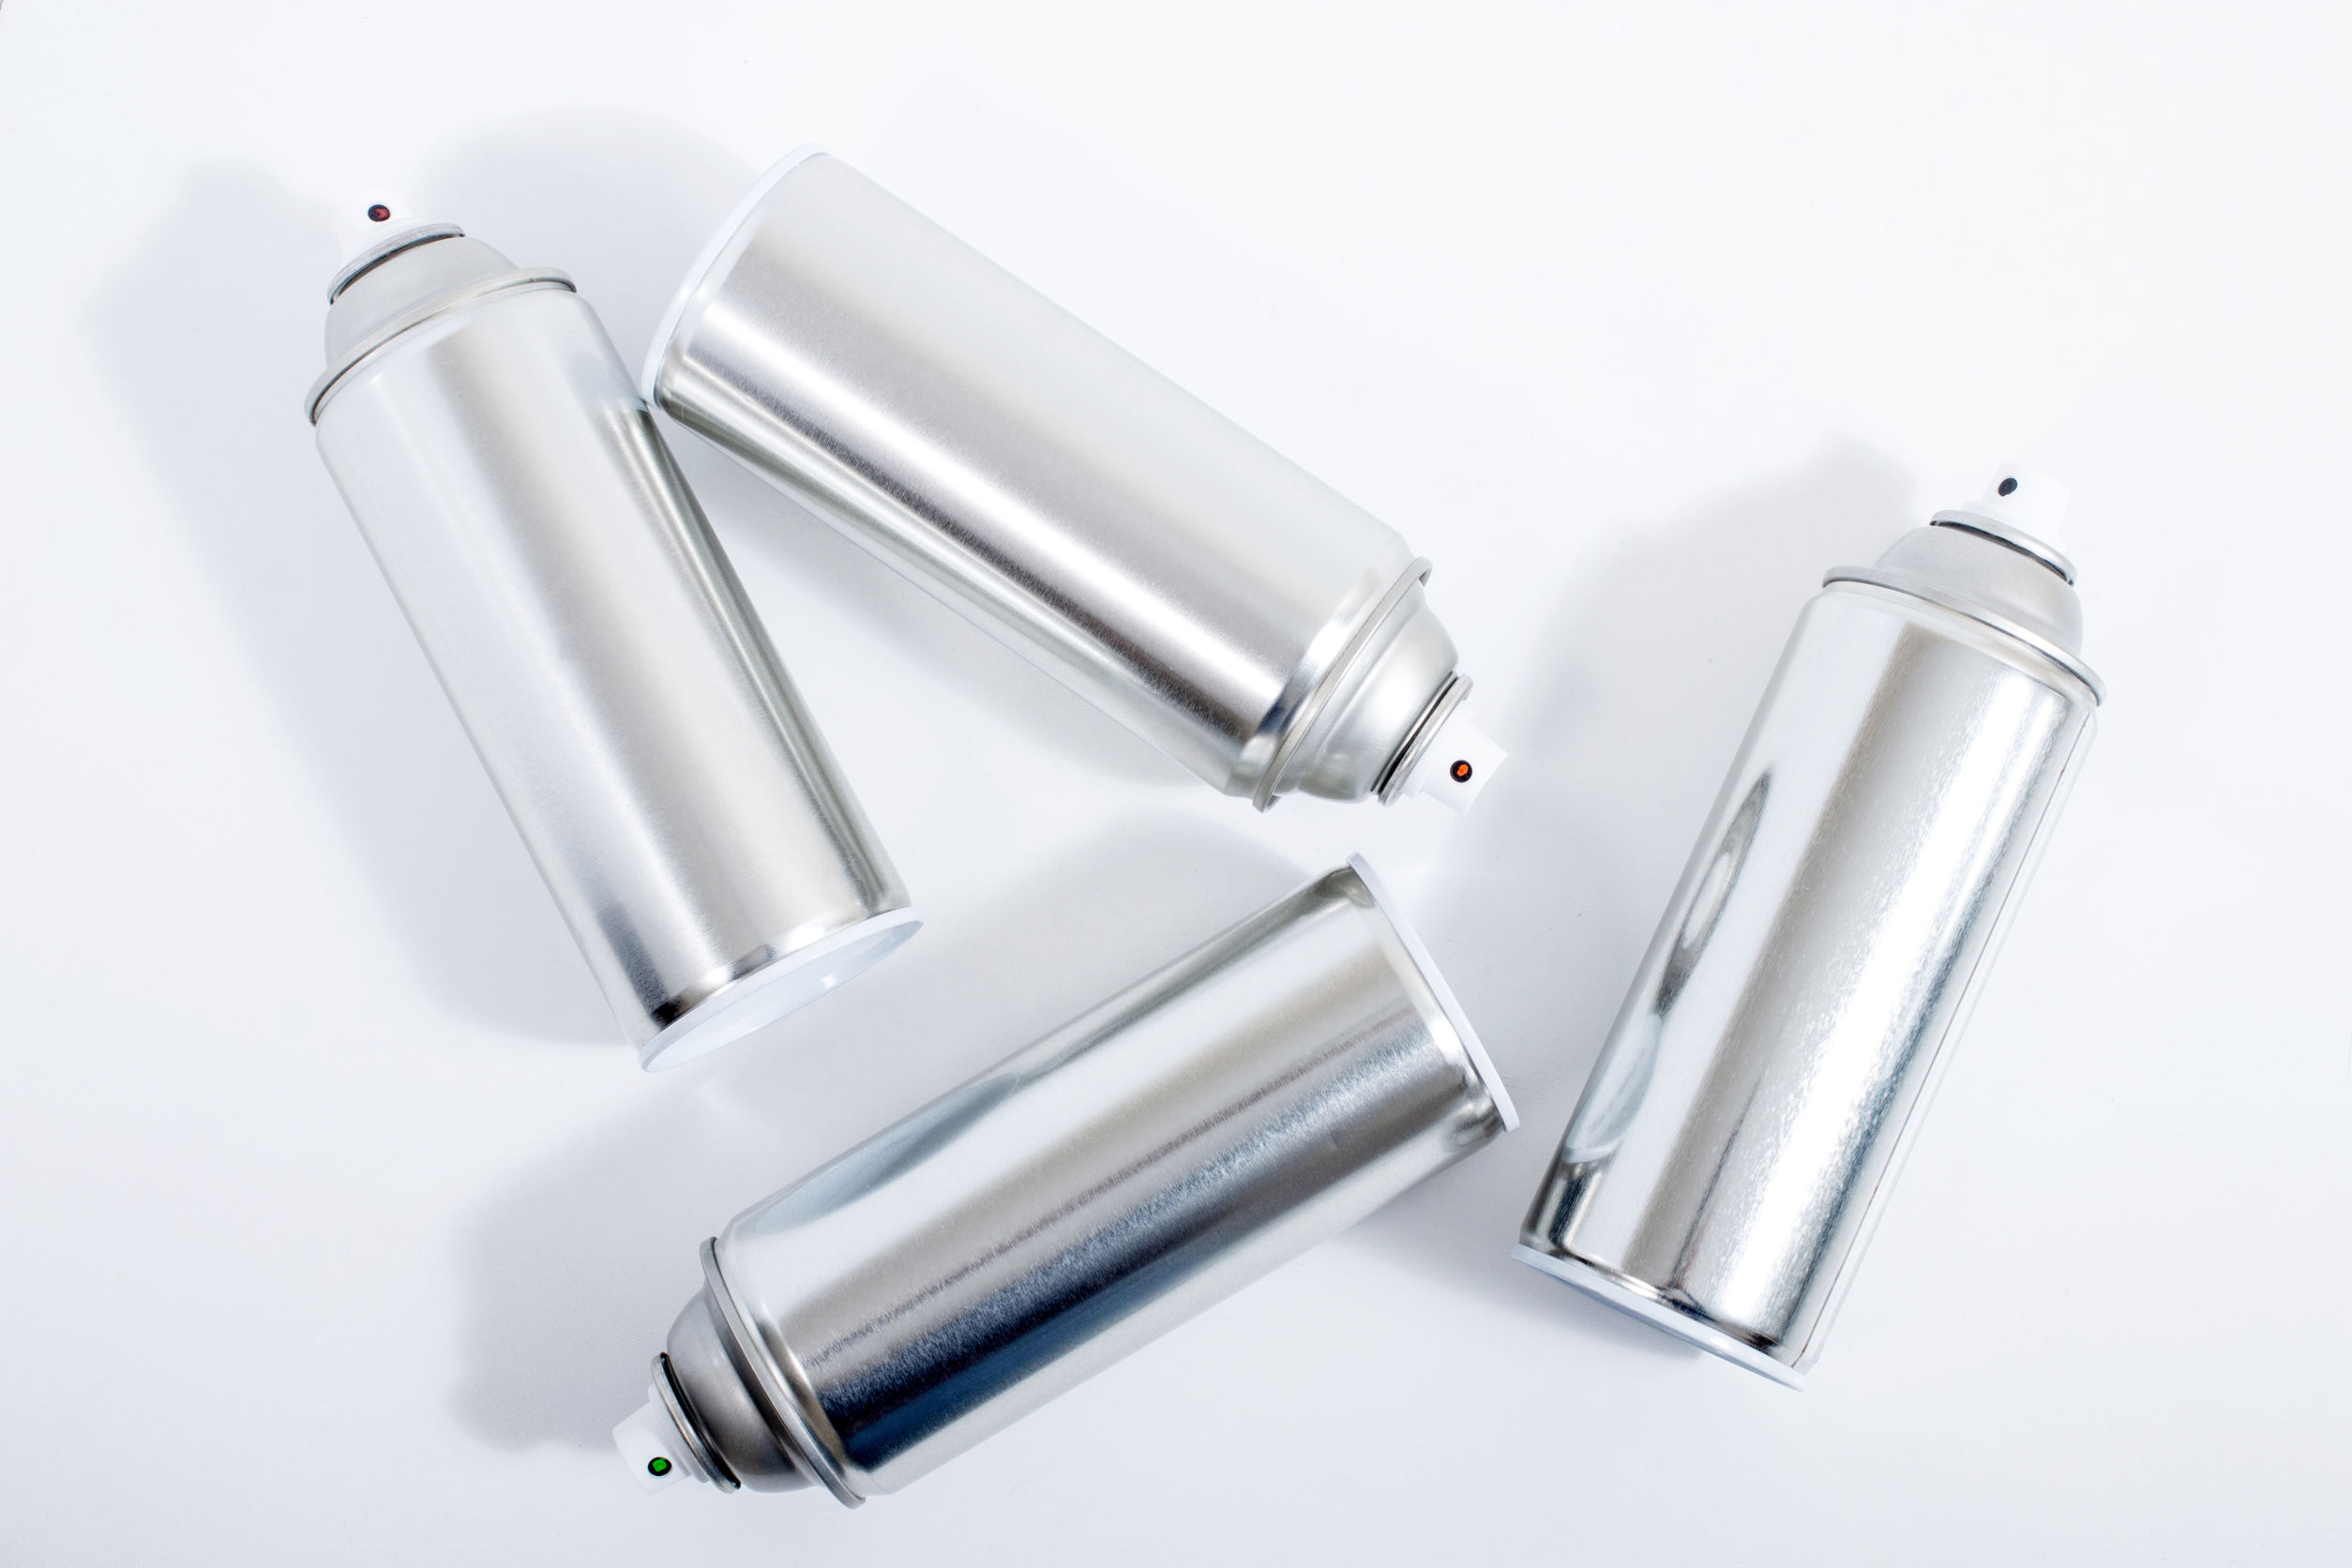 Close up view of silver spray cans on a white background.